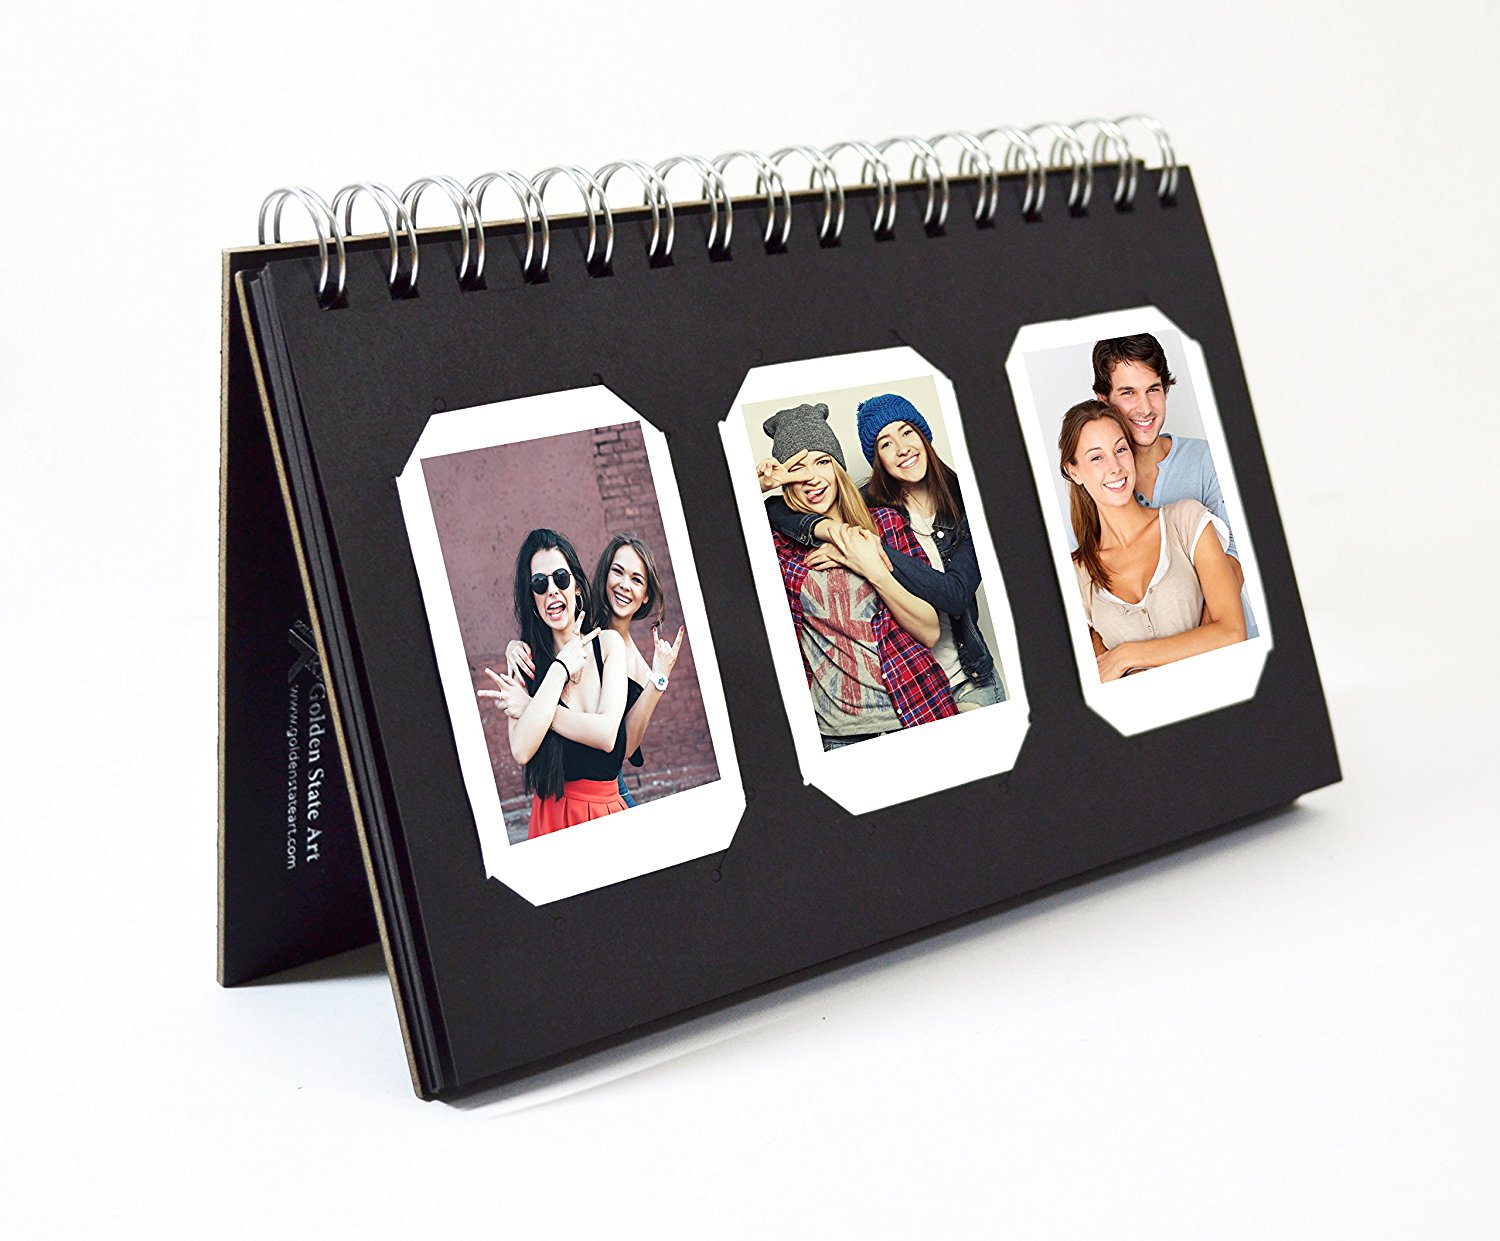 Golden State Art, Instax Frames Collection, Black Photo Album Book style 60 Pocket for Fuijufilm Instax Mini 7S 8 70 90 25 50S 8+ Film